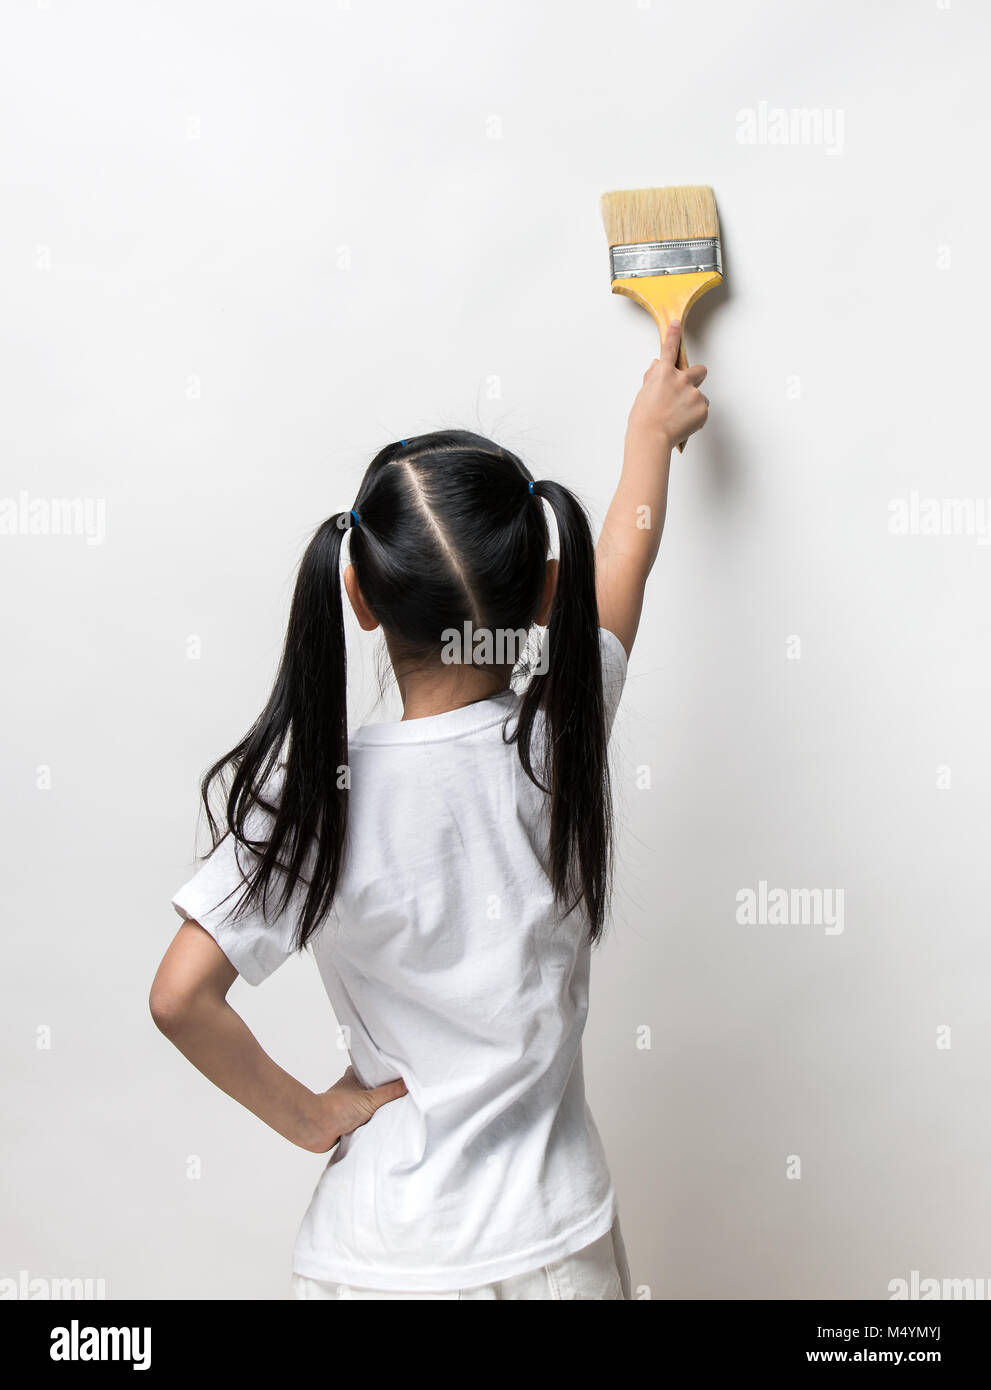 Little girl drawing something using painting brush on wall background Stock Photo